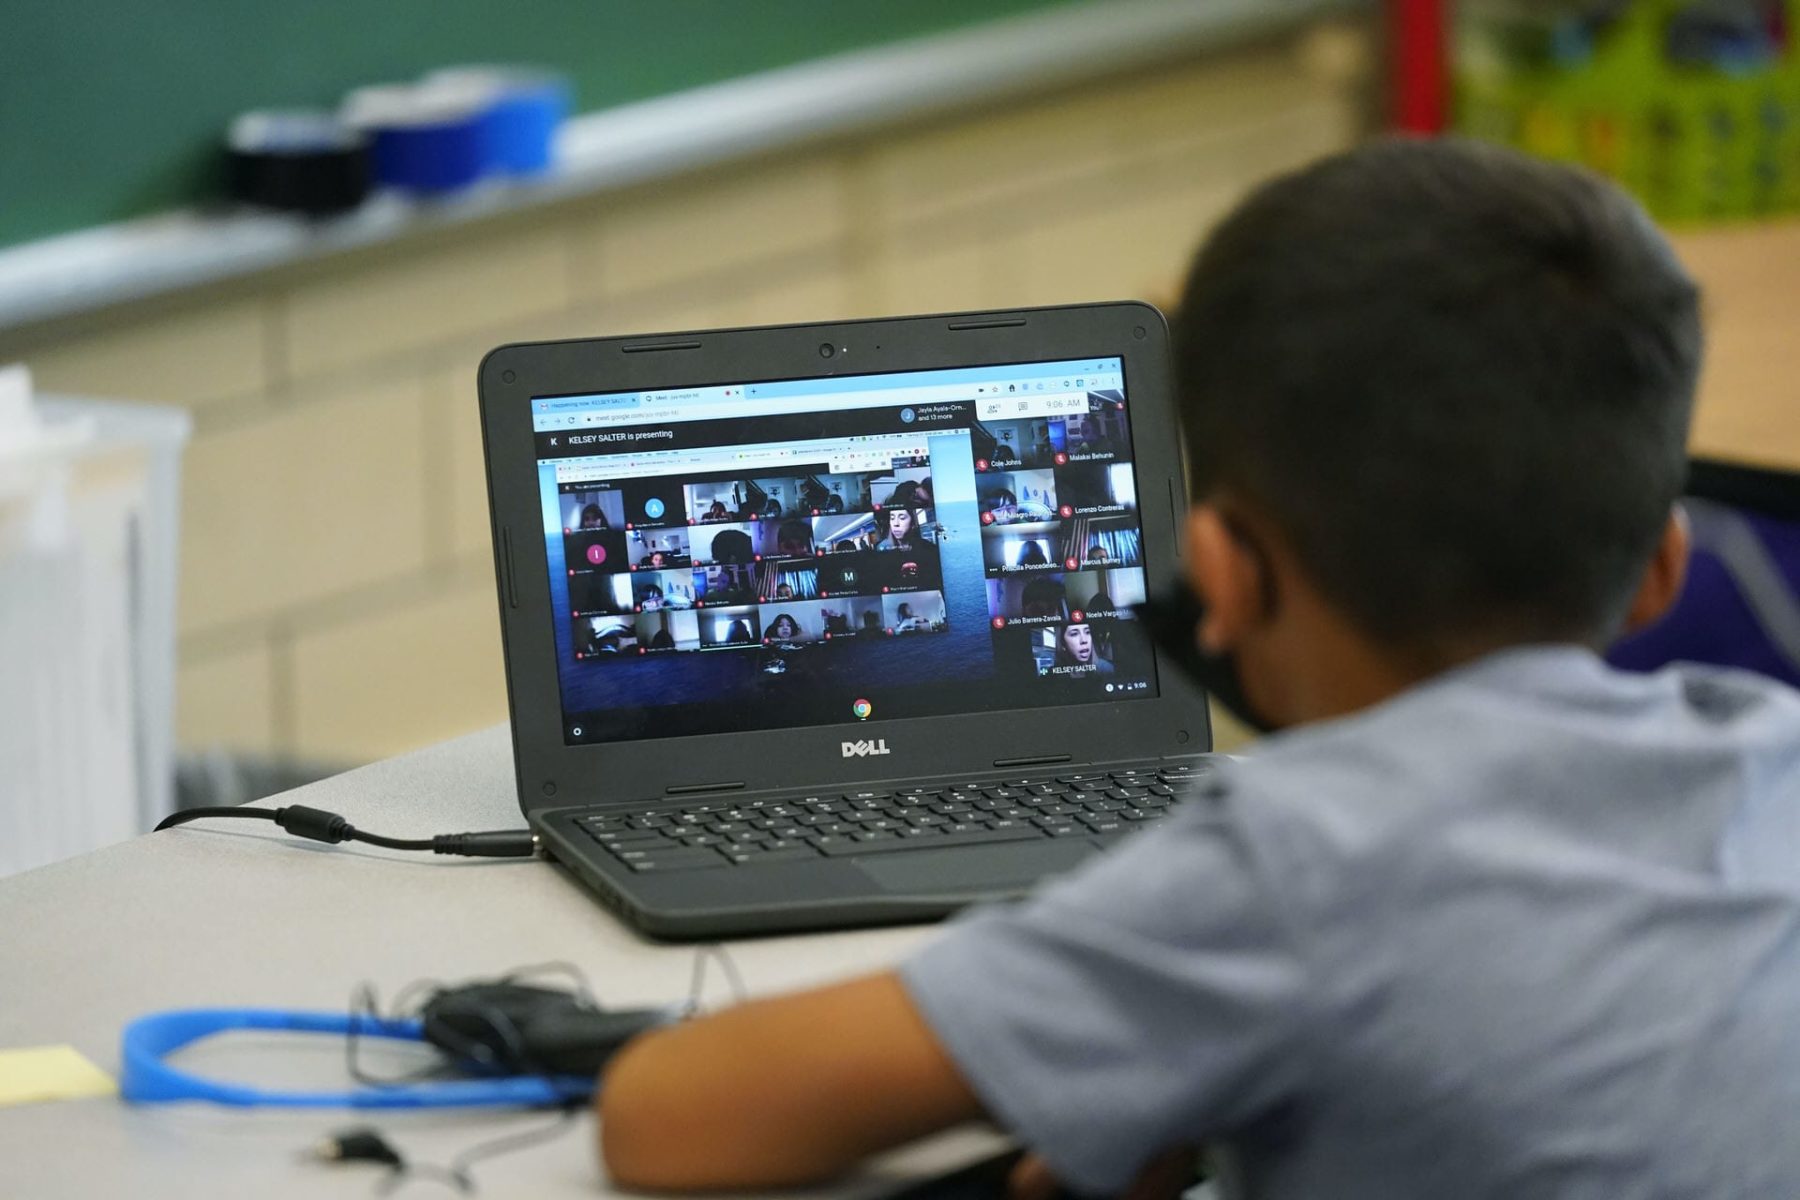 Justin Castilla works on a laptop in a classroom in Newlon Elementary School early Tuesday, Aug. 25, 2020, which is one of 55 Discovery Link sites set up by Denver Public Schools where students are participating in remote learning in this time of the new coronavirus from a school in Denver.